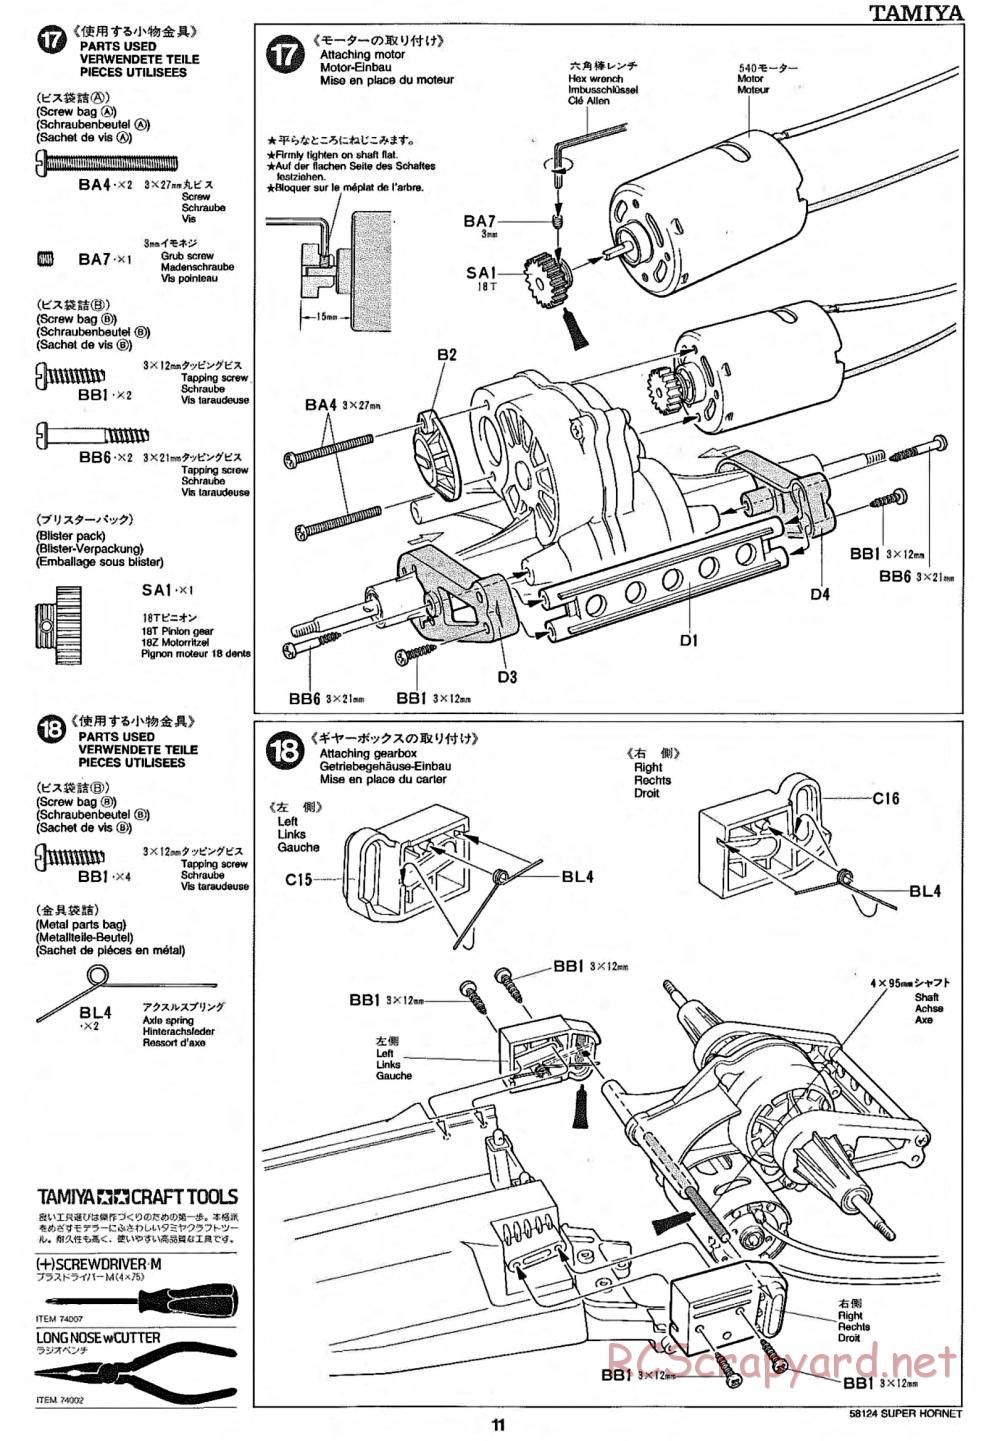 Tamiya - Super Hornet Chassis - Manual - Page 11